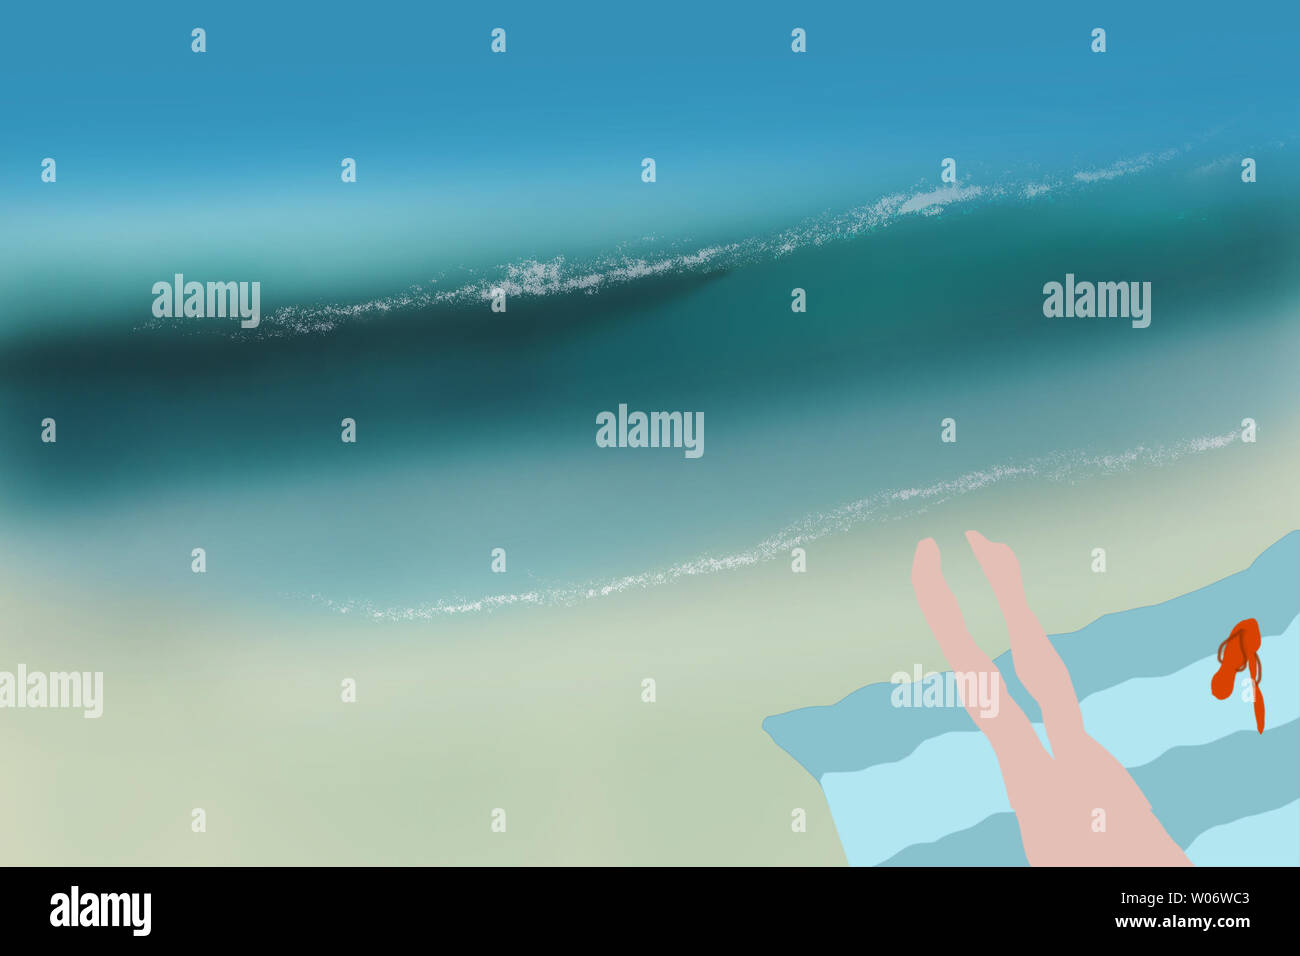 Illustration sandy beach with parasols in a row aerial view ocean wave Stock Photo